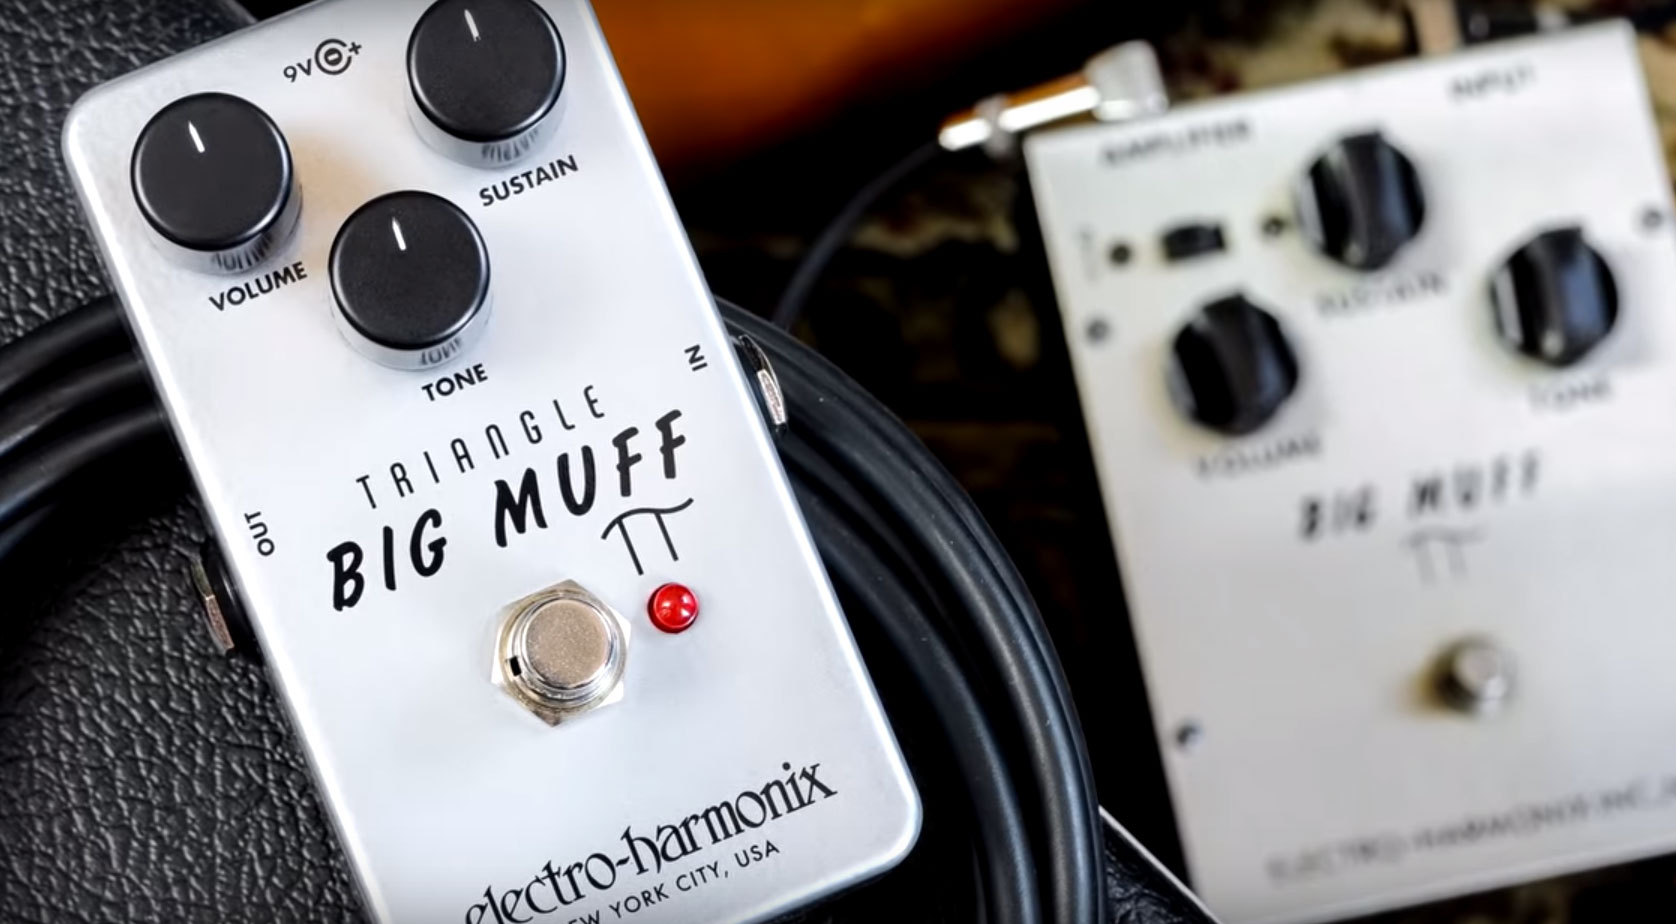 Electro Harmonix Triangle Big Muff Pi Distortion/sustainer/fuzz - Overdrive, distortion & fuzz effect pedal - Variation 3